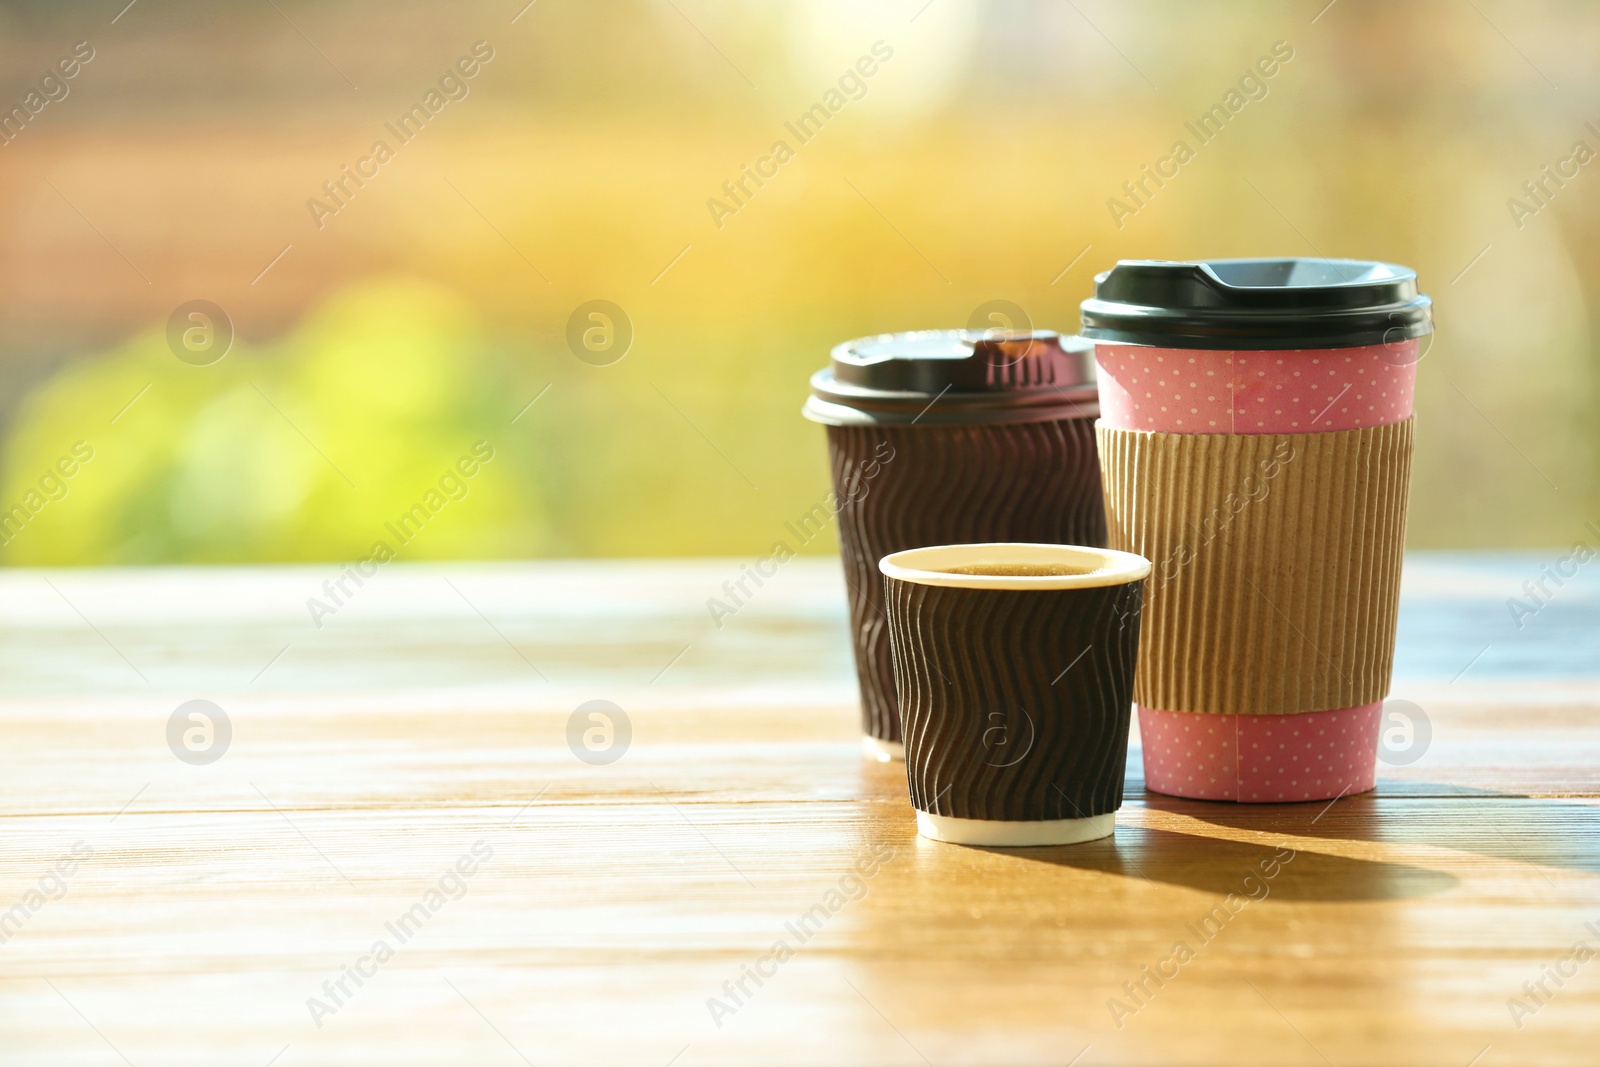 Photo of Cardboard cups of coffee on table against blurred background. Space for text